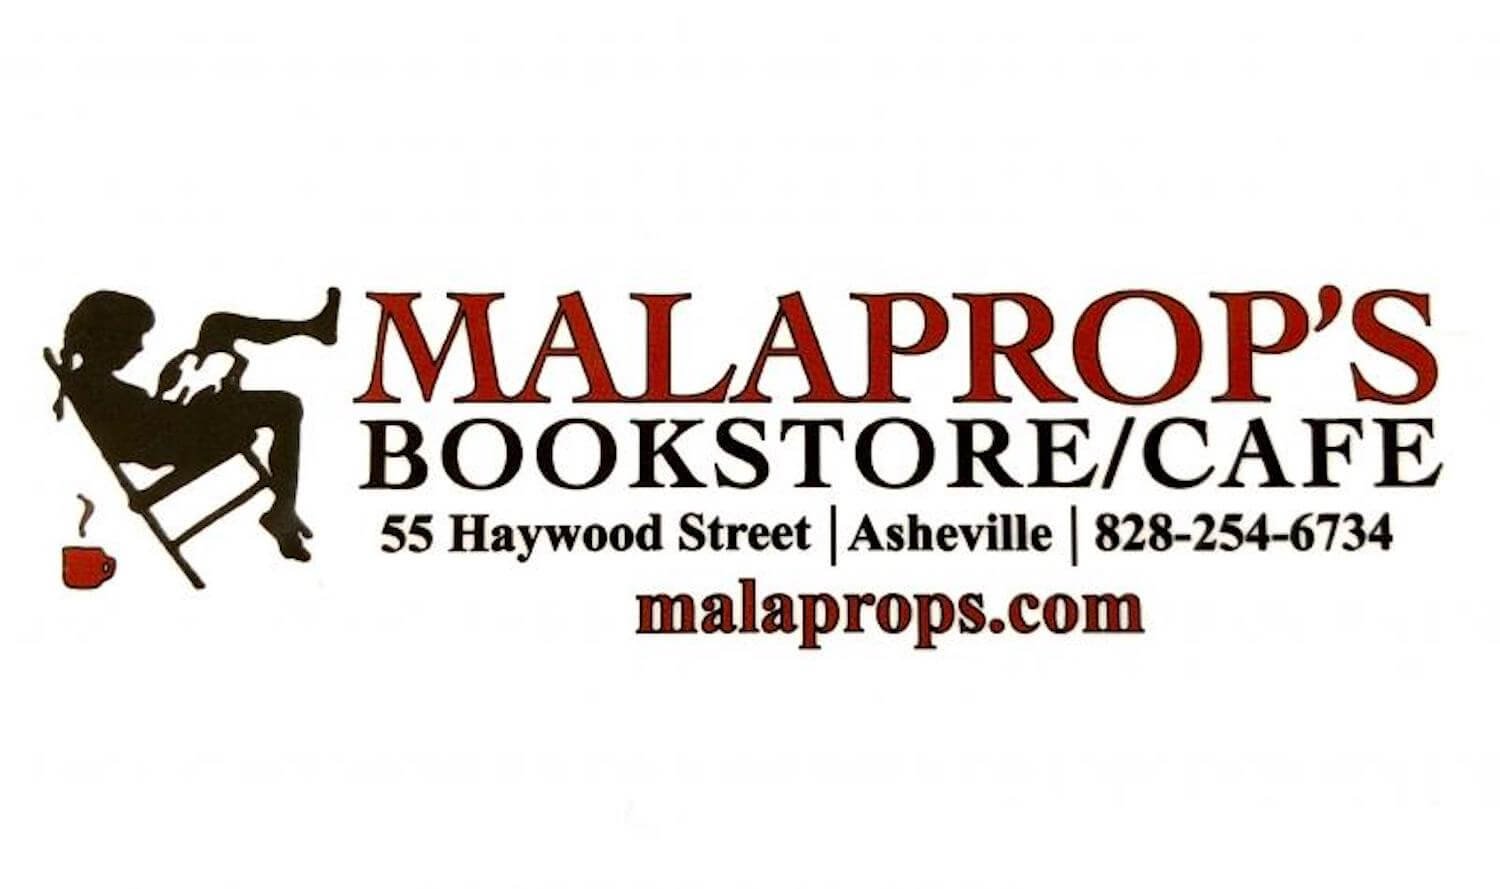 Malaprops Bookstore and Cafe Asheville